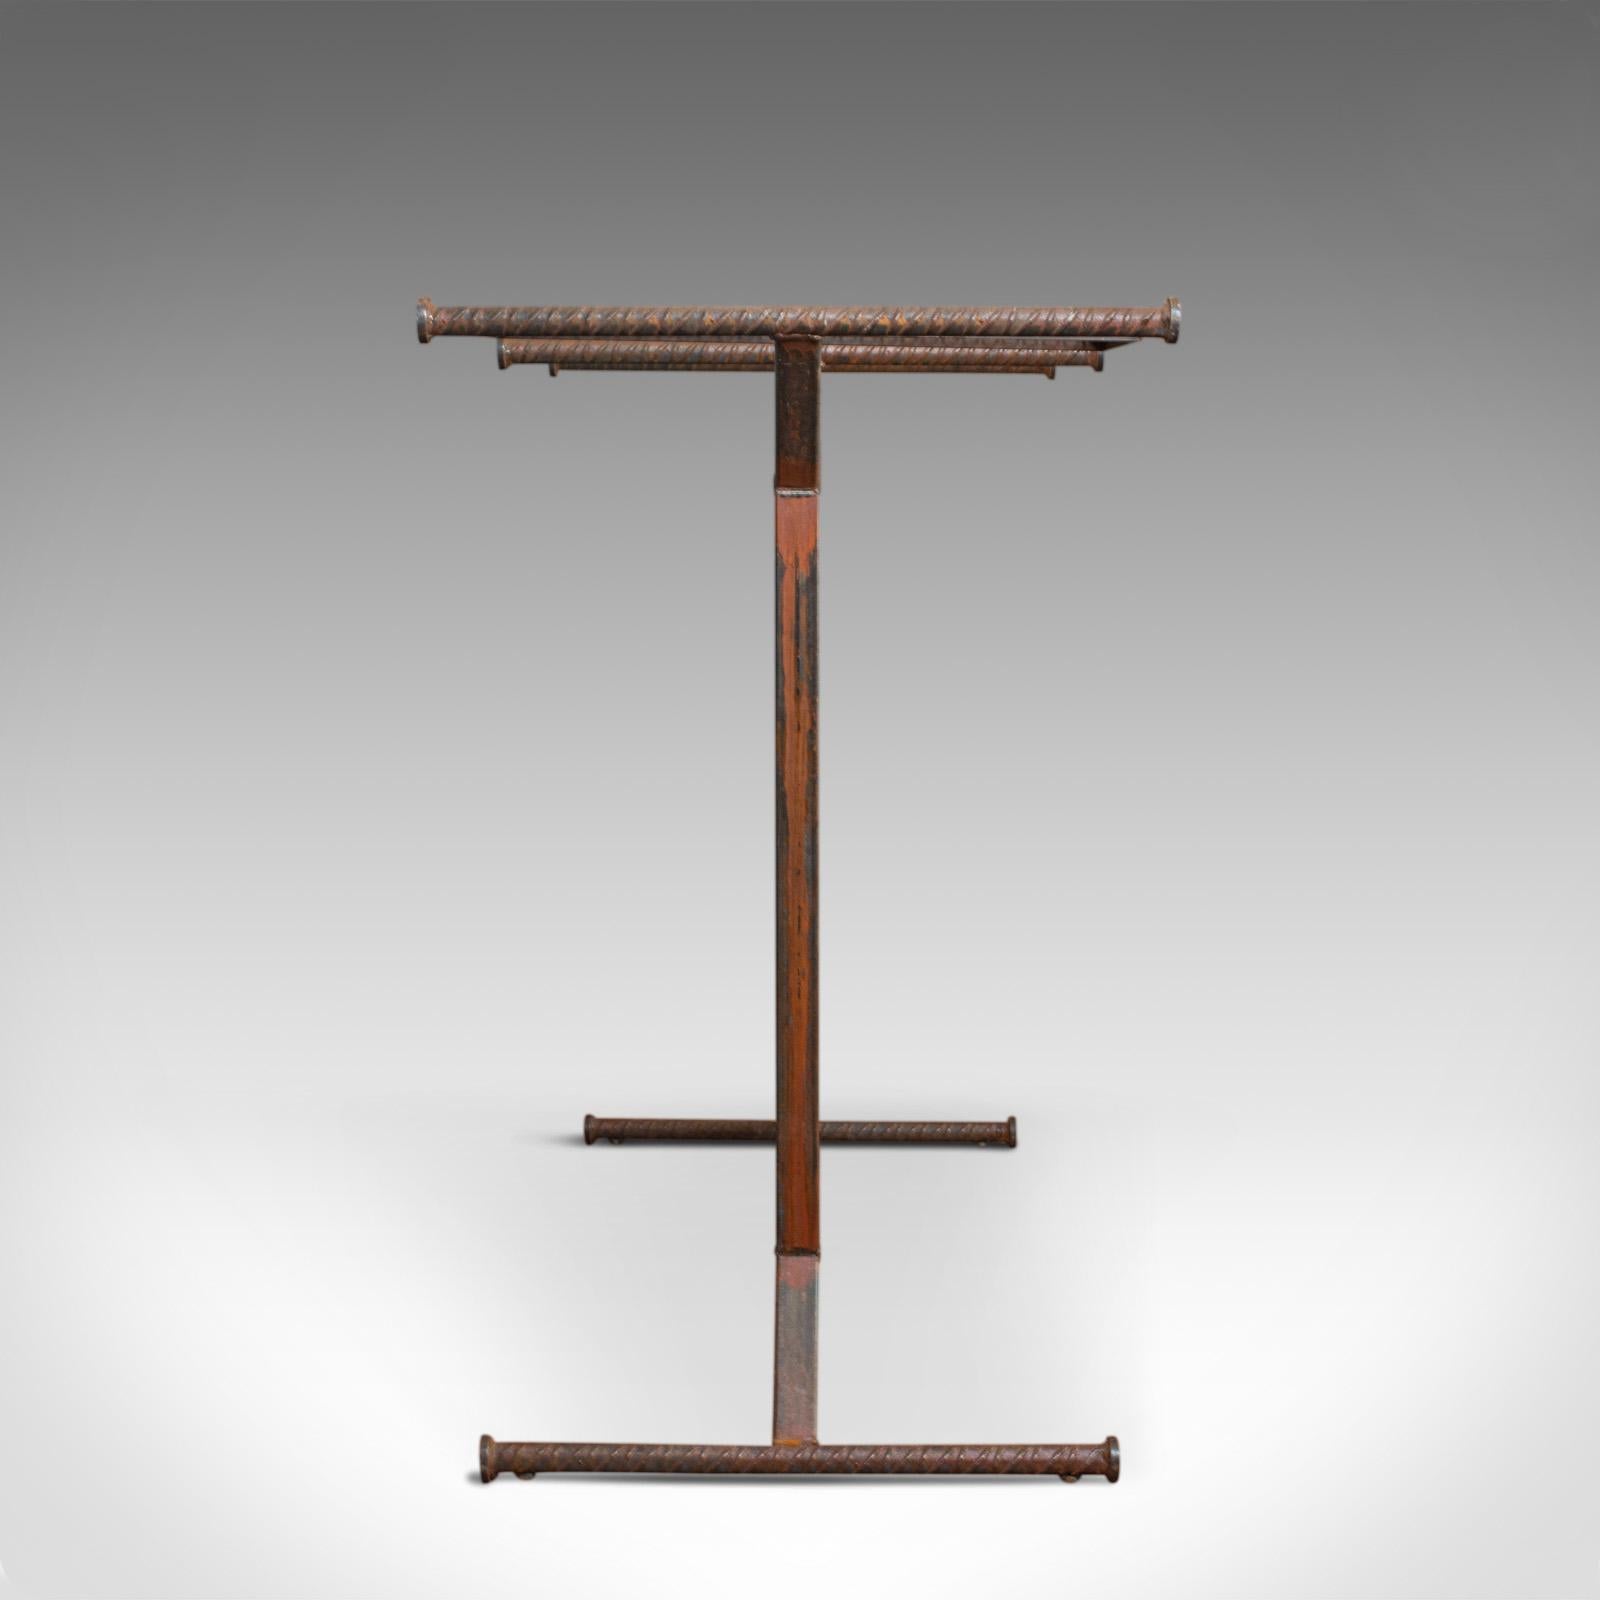 This is a vintage clothes rail. An English steel and oak retail shopfitting in industrial taste and dating to the 20th century.

Desirably aged steel and oak with fine grain interest
Strong industrial taste with coloration and dark staining
A